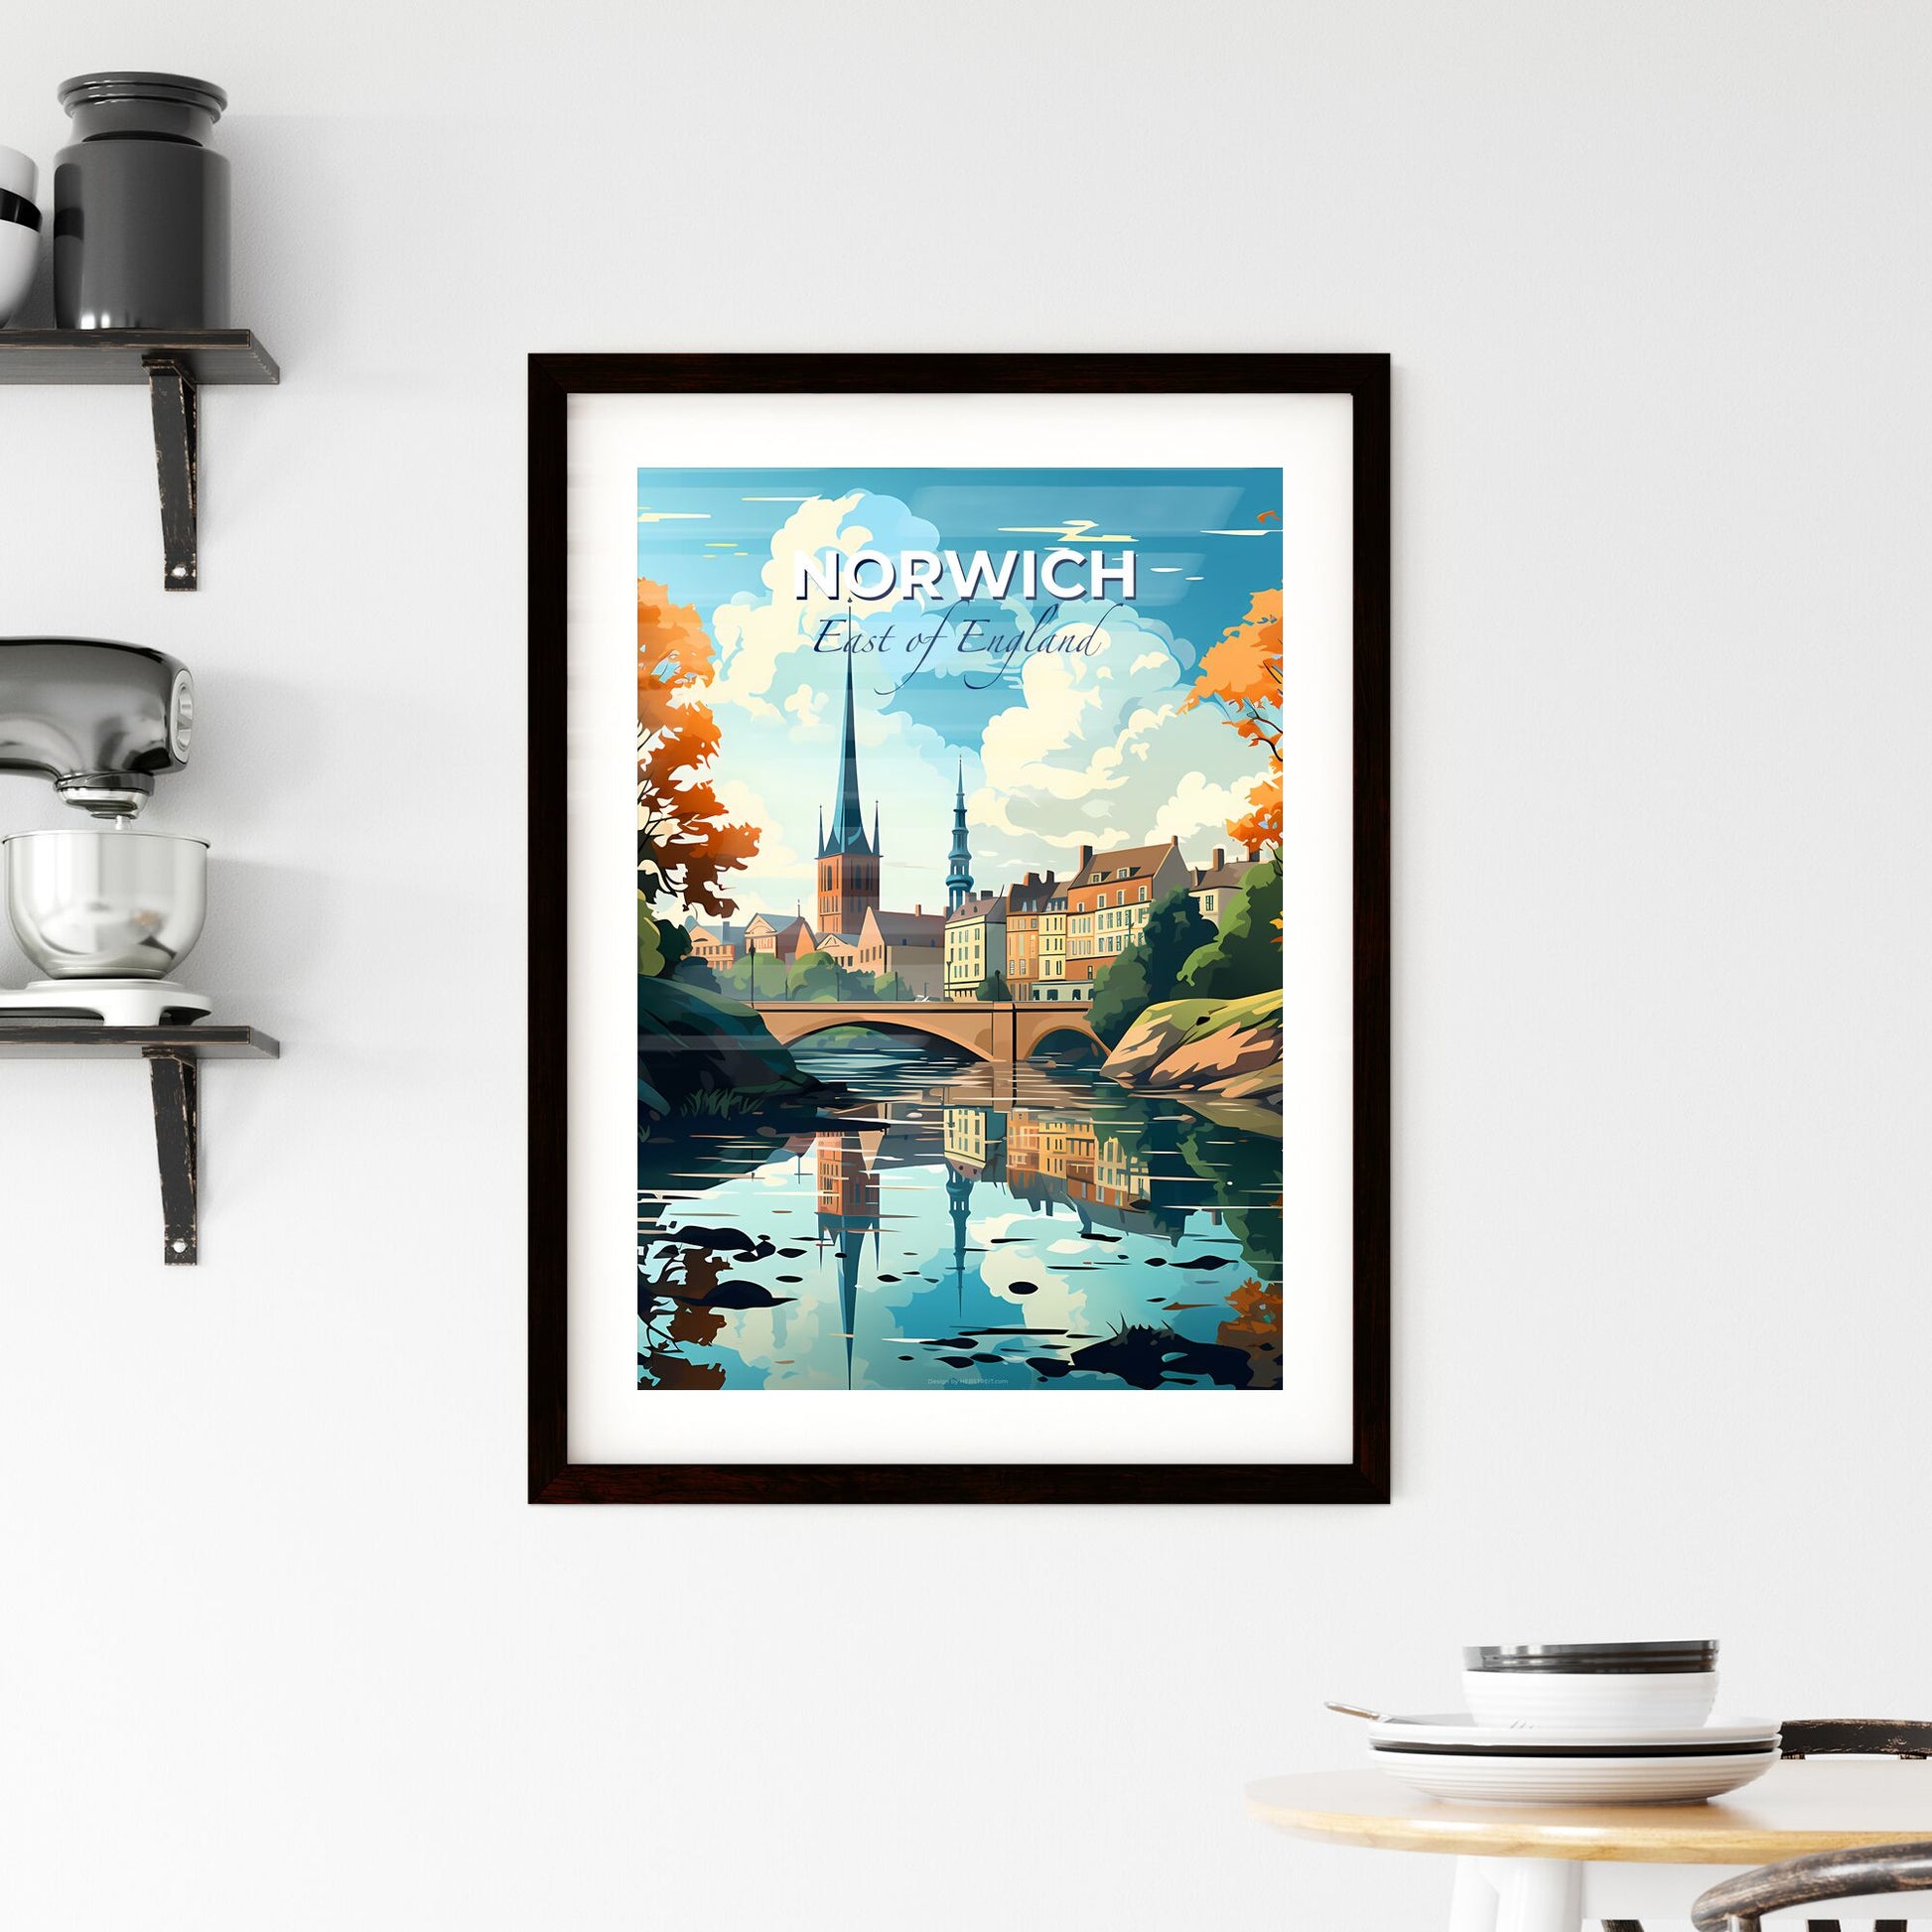 Norwich, East of England, A Poster of a bridge over a river with trees and buildings Default Title